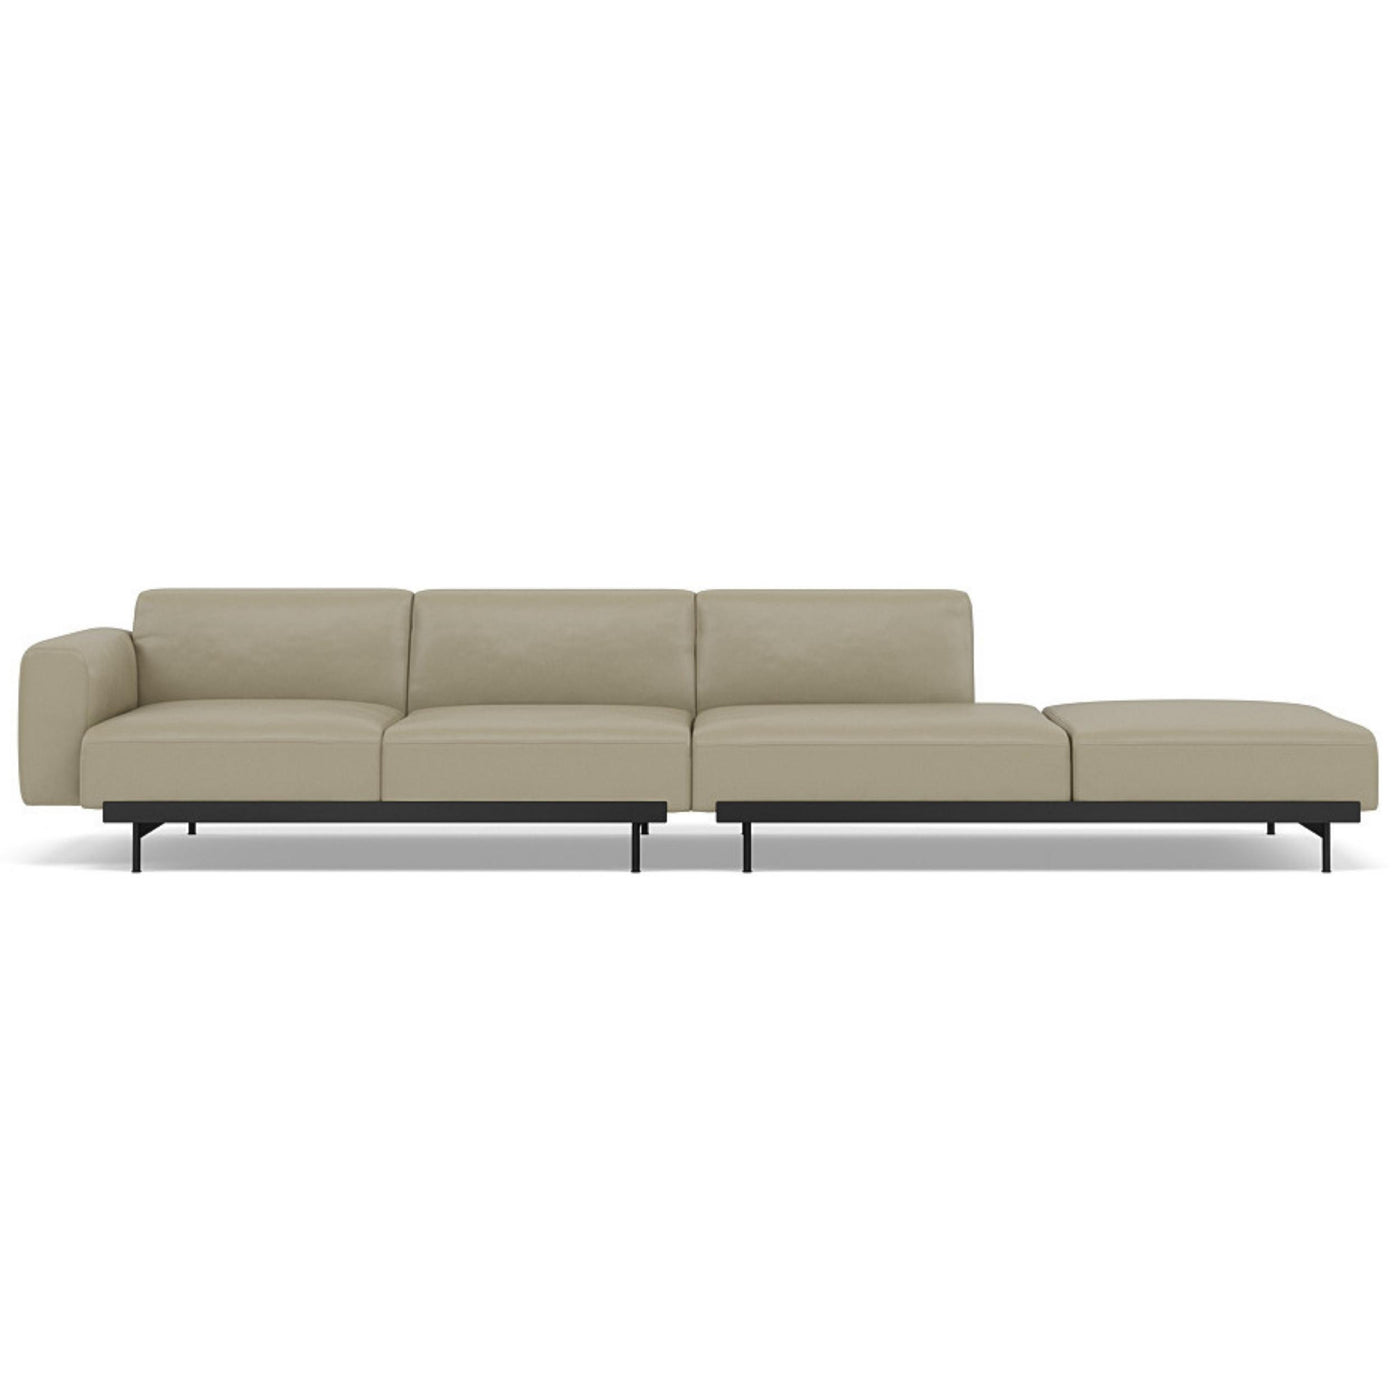 Muuto In Situ Modular 4 Seater Sofa configuration 2. Made to order from someday designs. #colour_stone-refine-leather